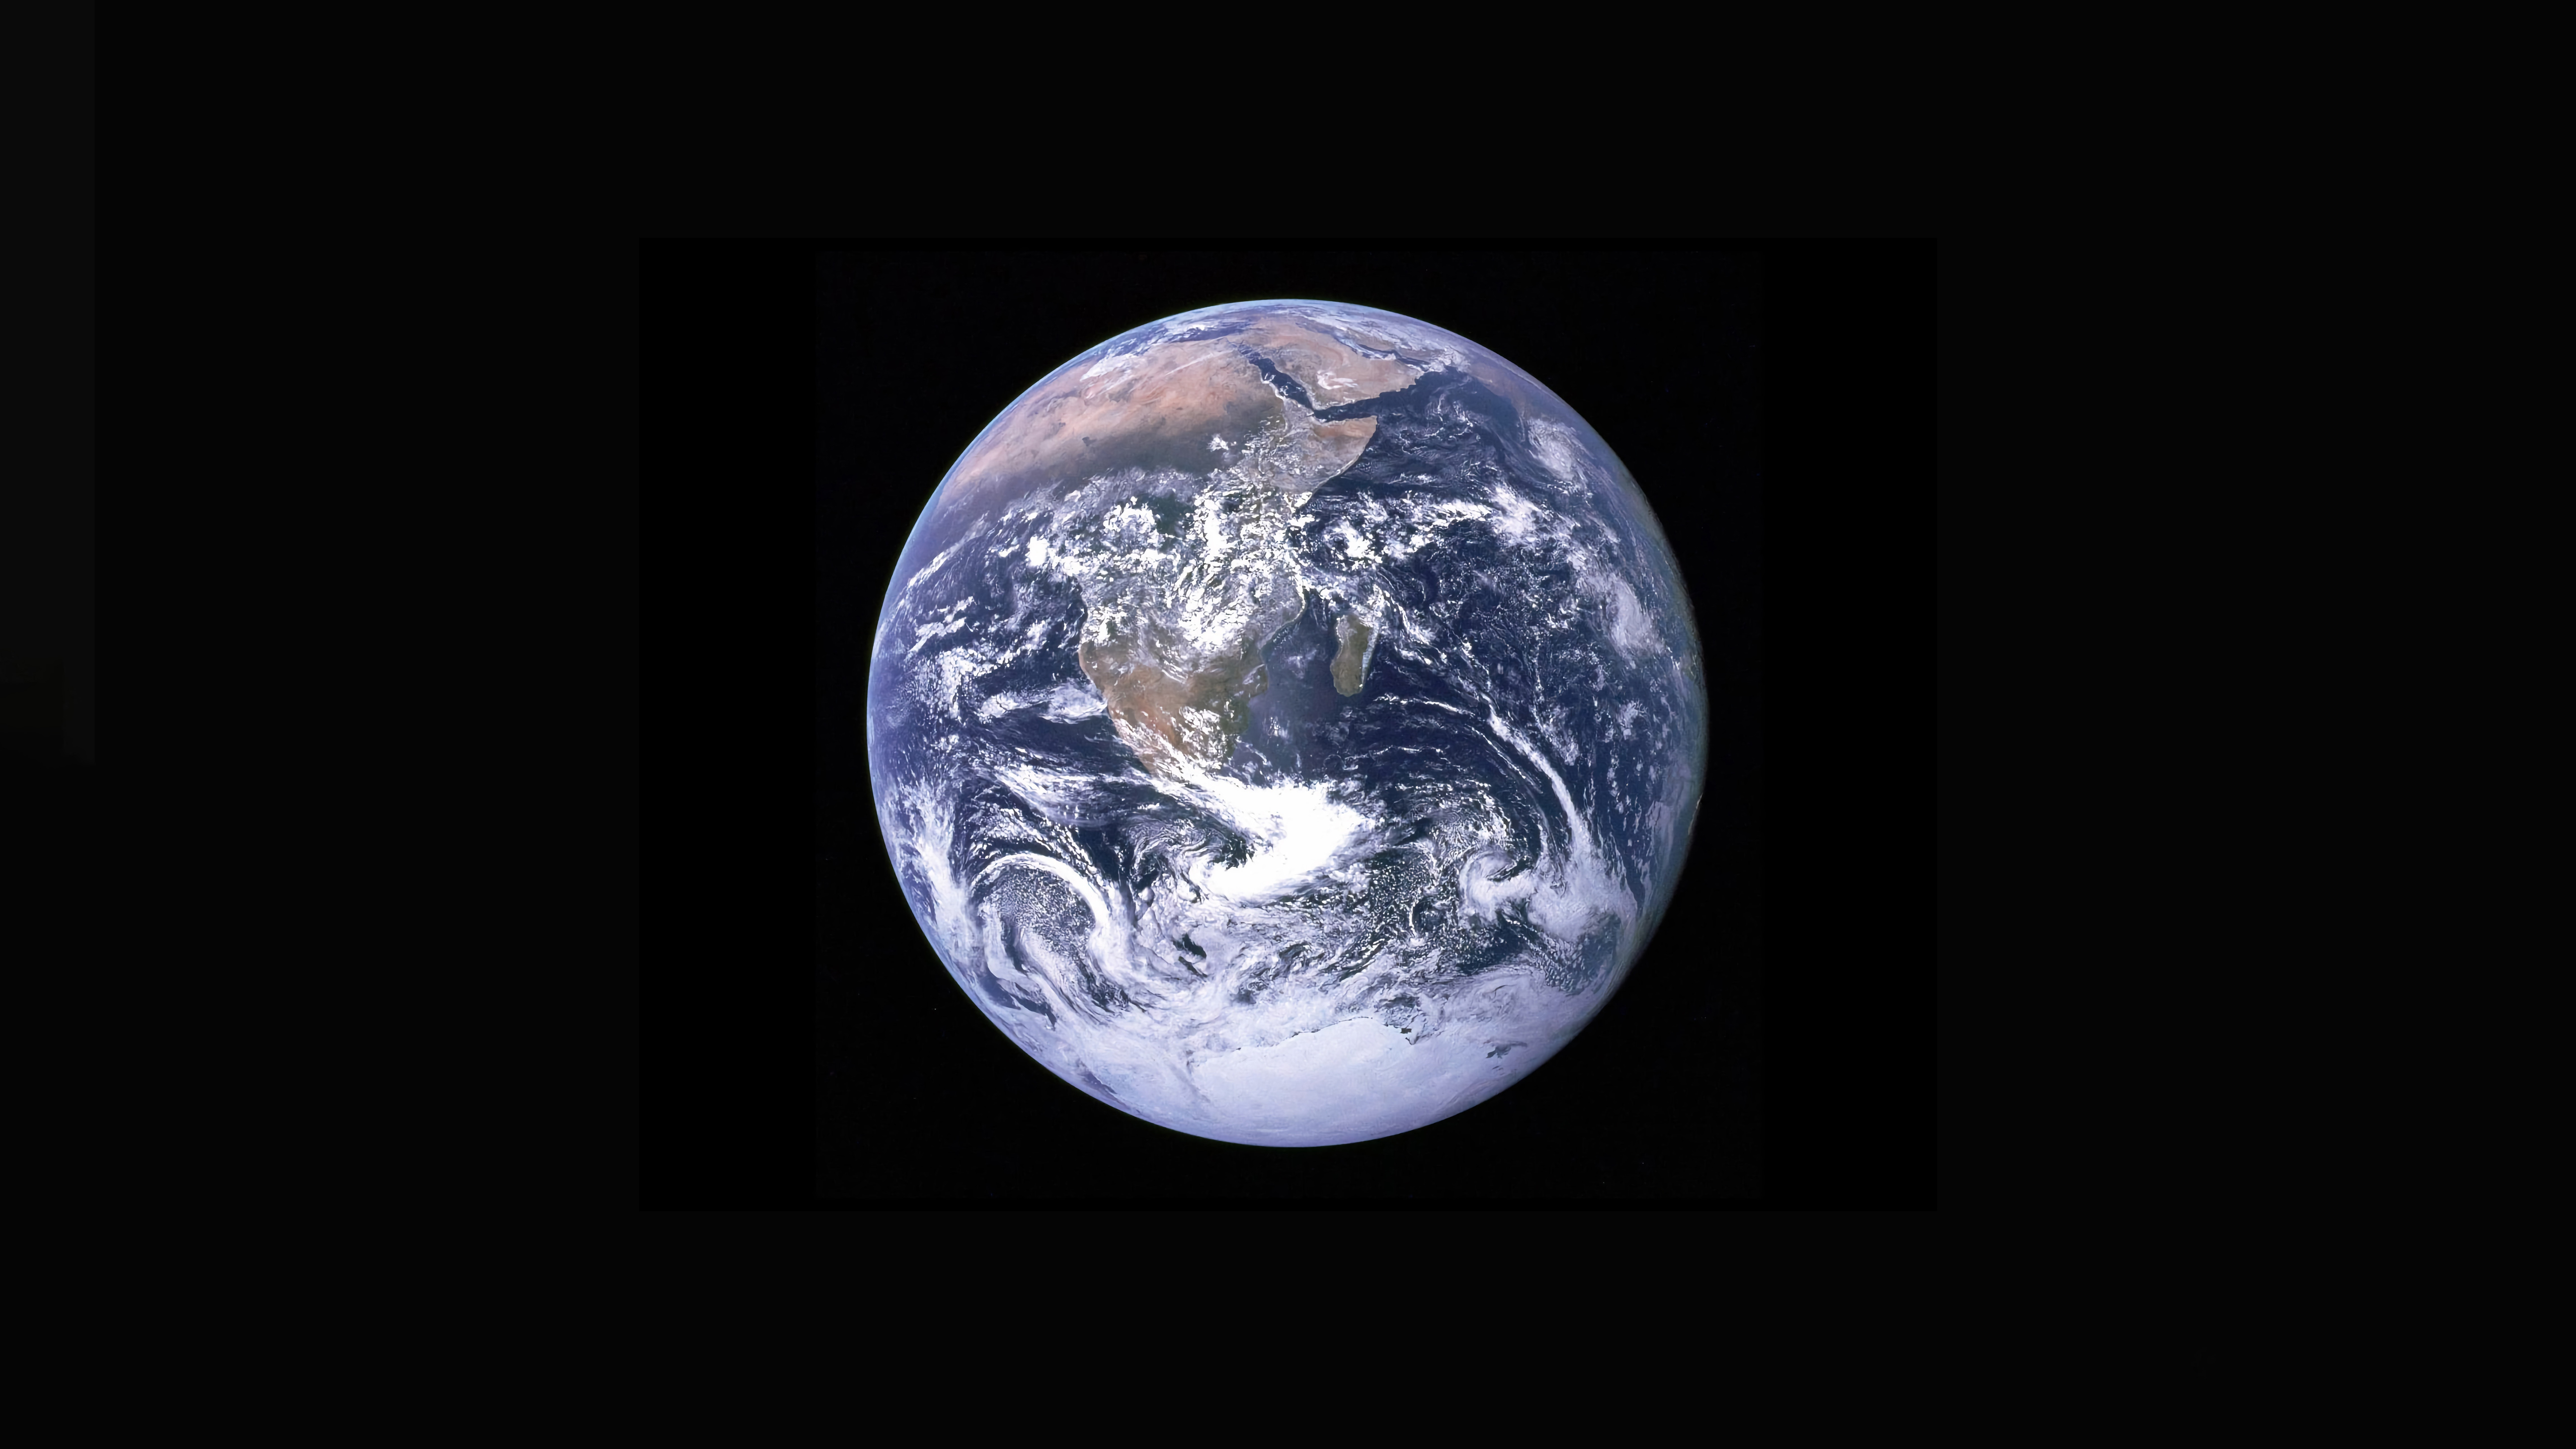 view of the earth from apollo 17 crew 4k 1629255911 - View Of The Earth From Apollo 17 Crew 4k - View Of The Earth From Apollo 17 Crew wallpapers, View Of The Earth From Apollo 17 Crew 4k wallpapers